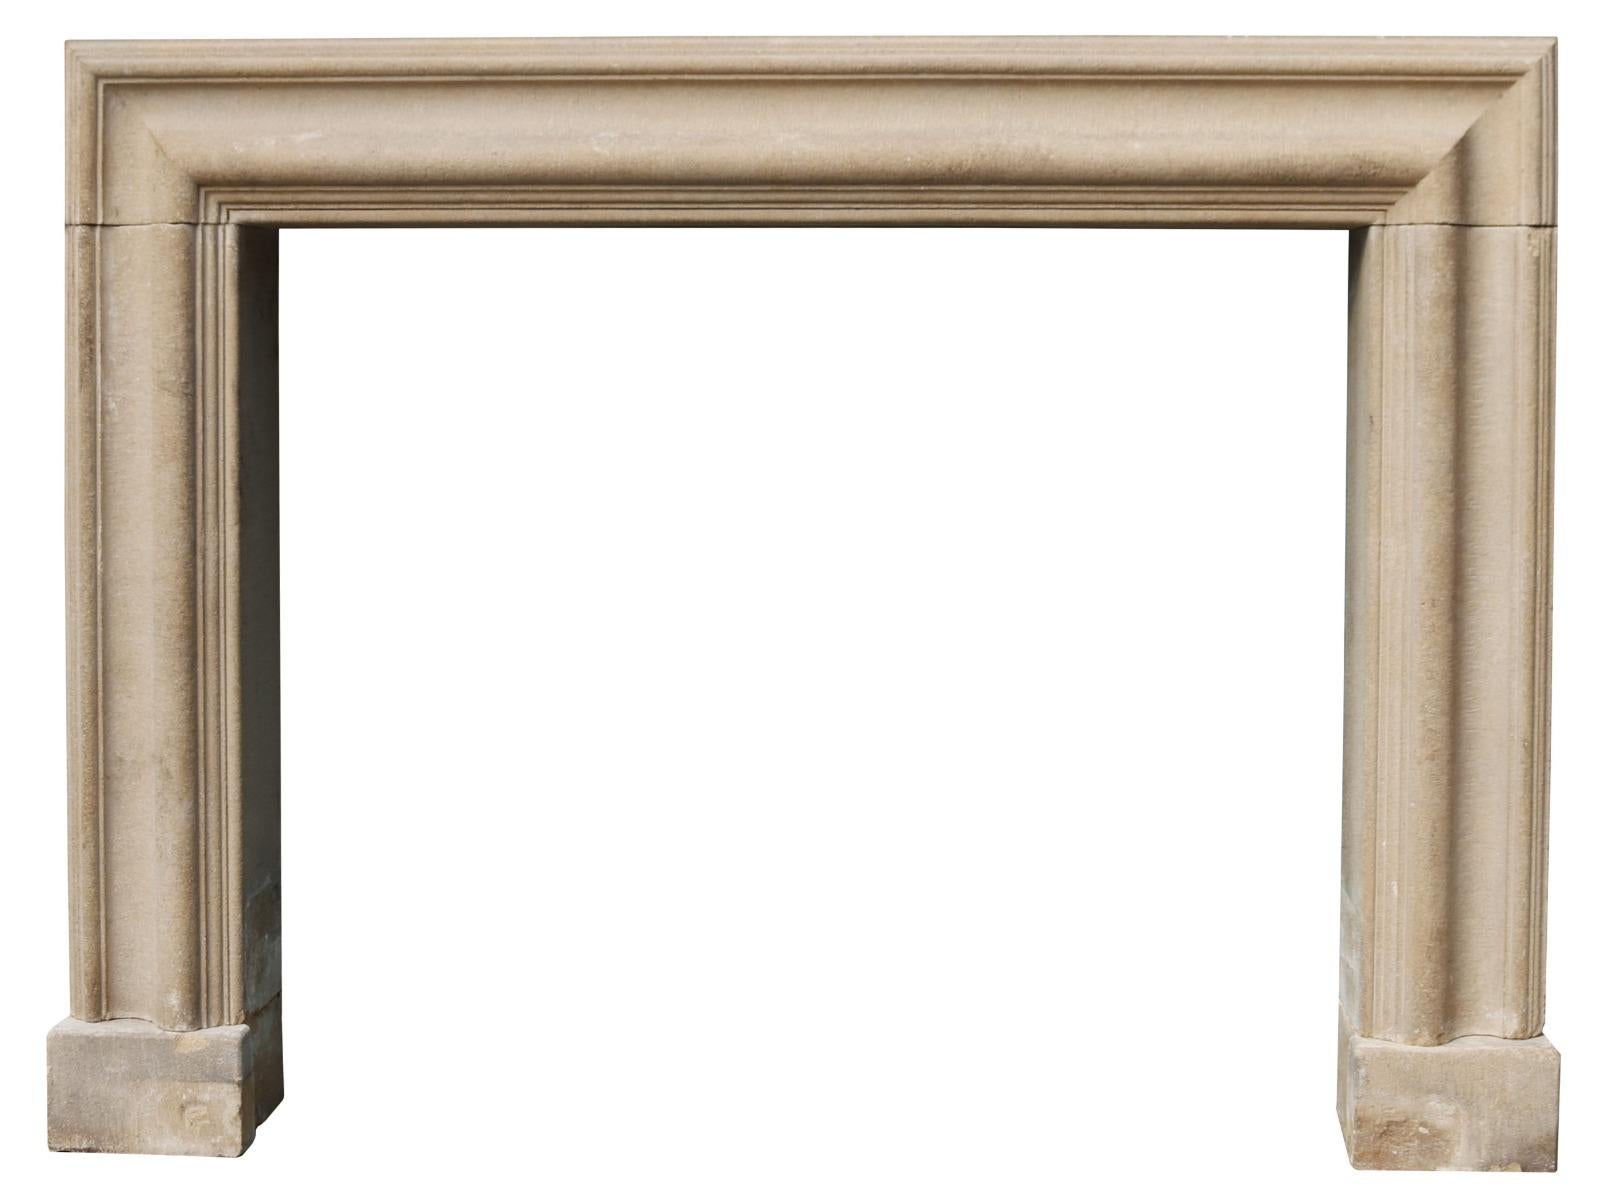 A reclaimed Bolection stone fire surround of large proportions.

Additional Dimensions:

Opening Height 114 cm

Opening Width 137.5 cm

Width between outsides of the foot blocks 185 cm.